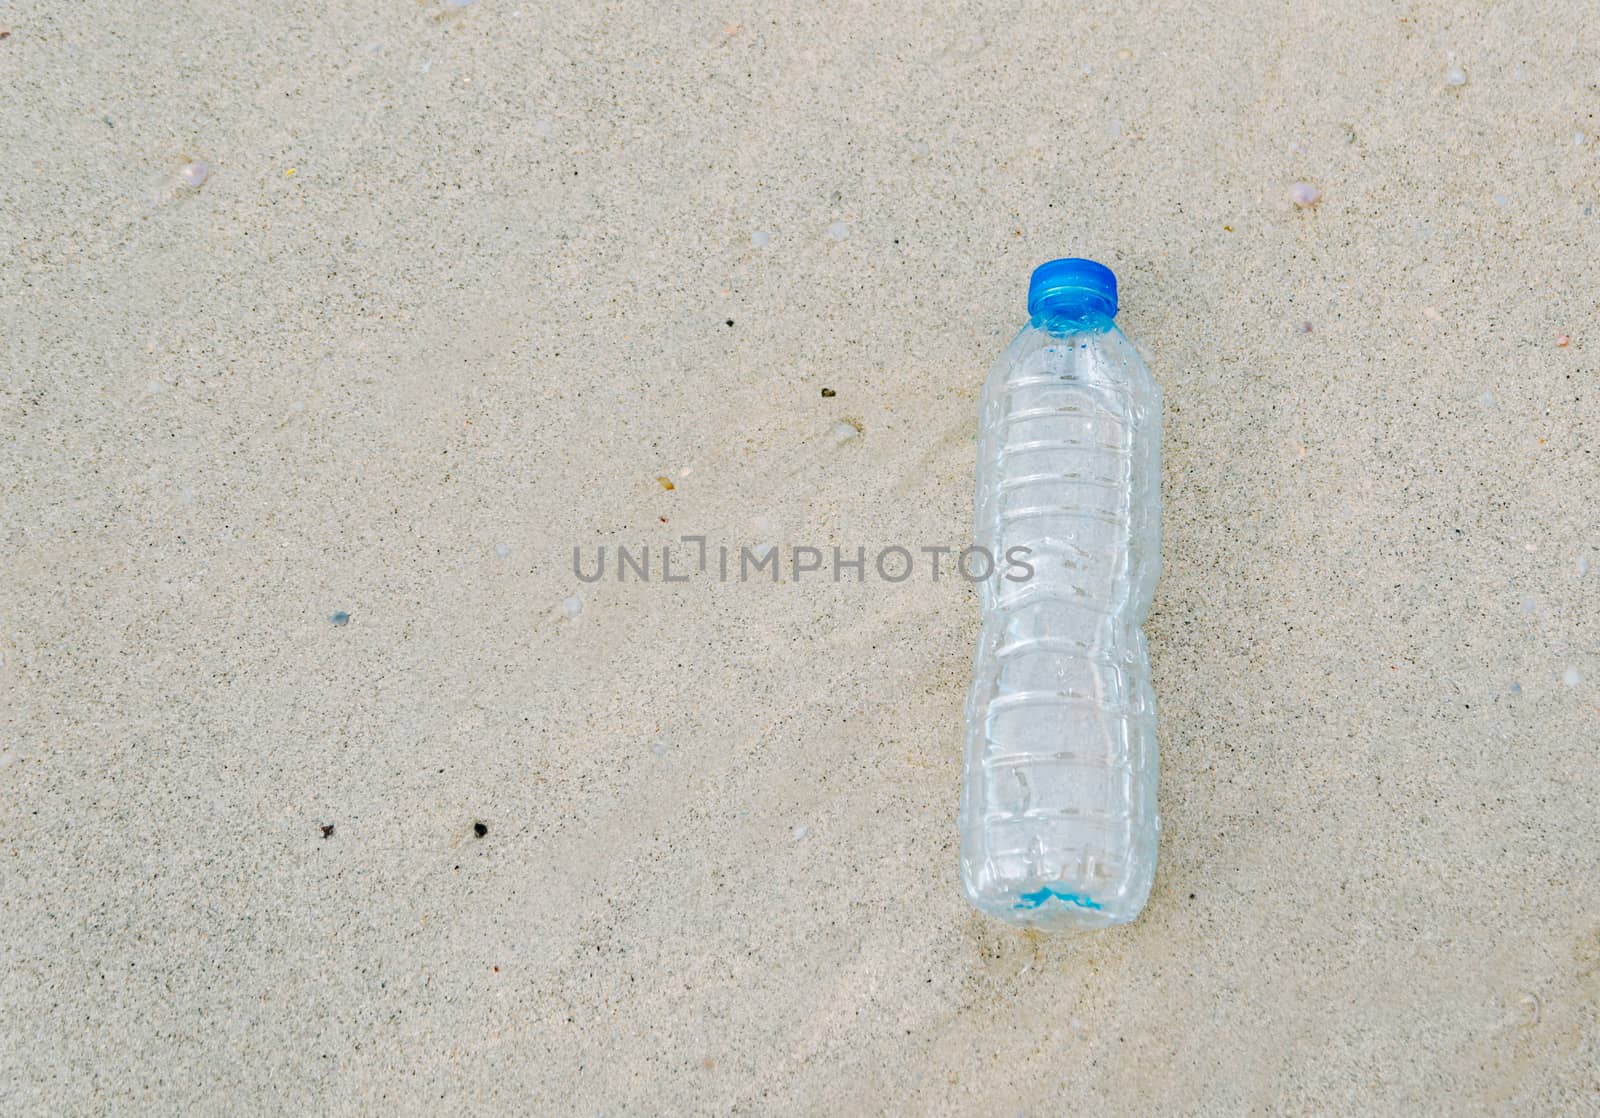 Plastic bottle garbage on the beach Human waste dumping by sompongtom